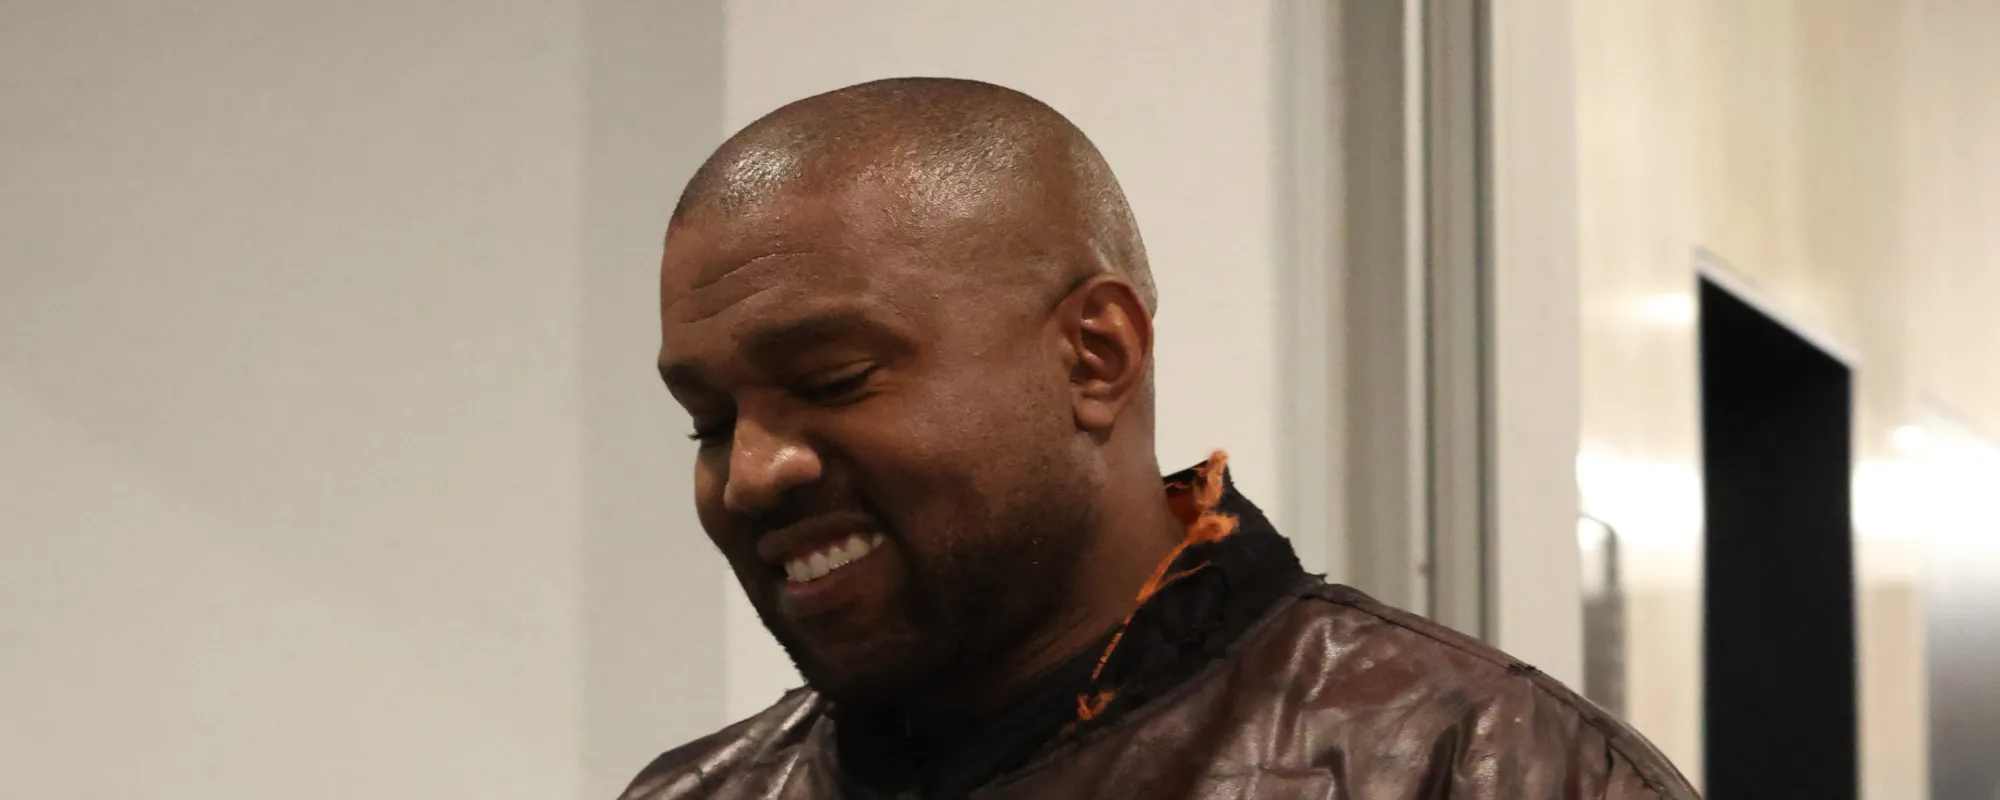 Adidas CEO Doesn’t Think Kanye West is a “Bad Person” Despite Antisemitism